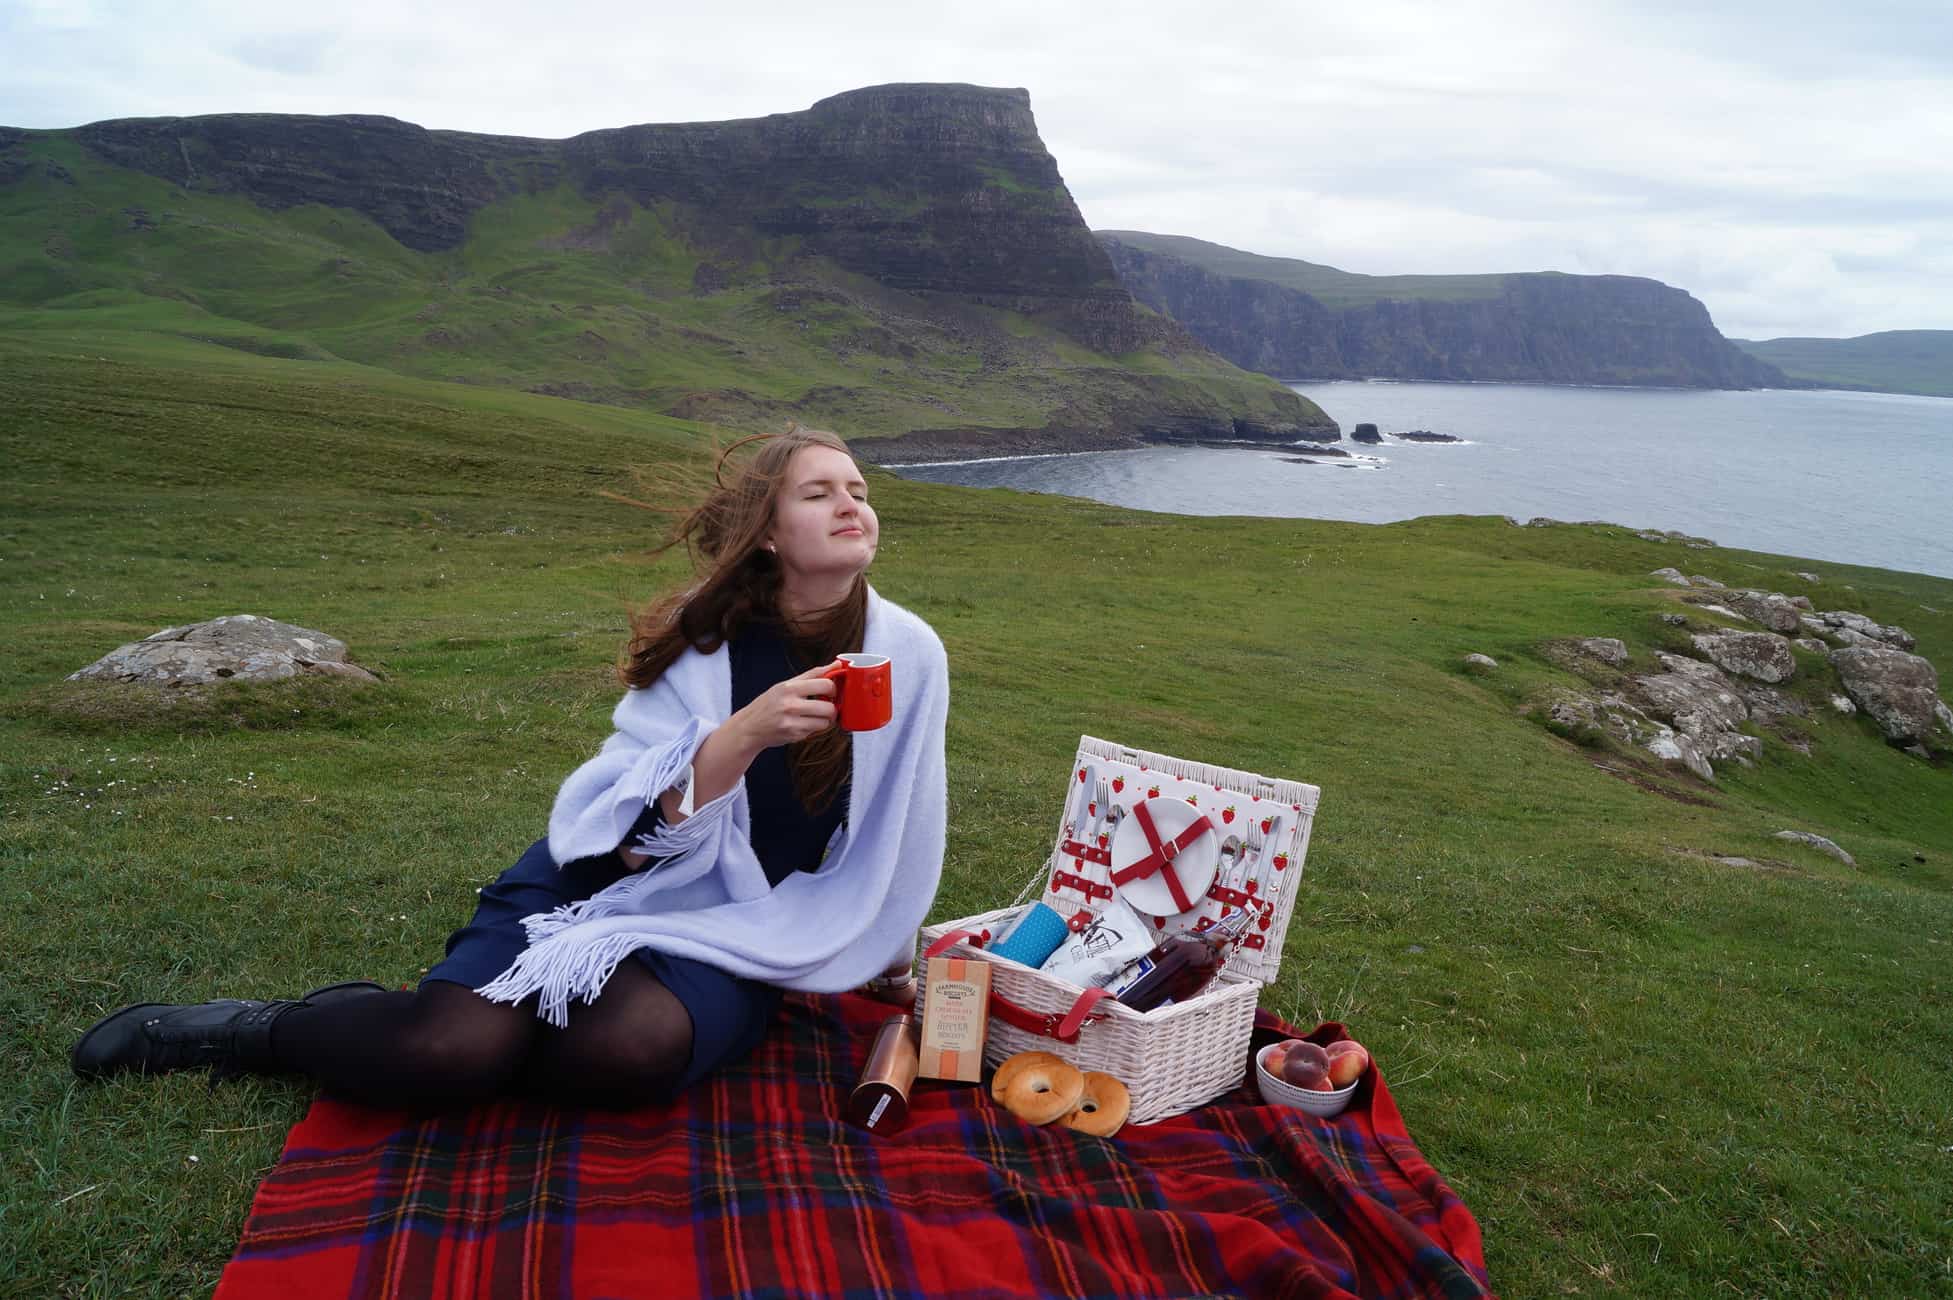 Picnic at the Neist Point, The Isle of Skye, Scotland